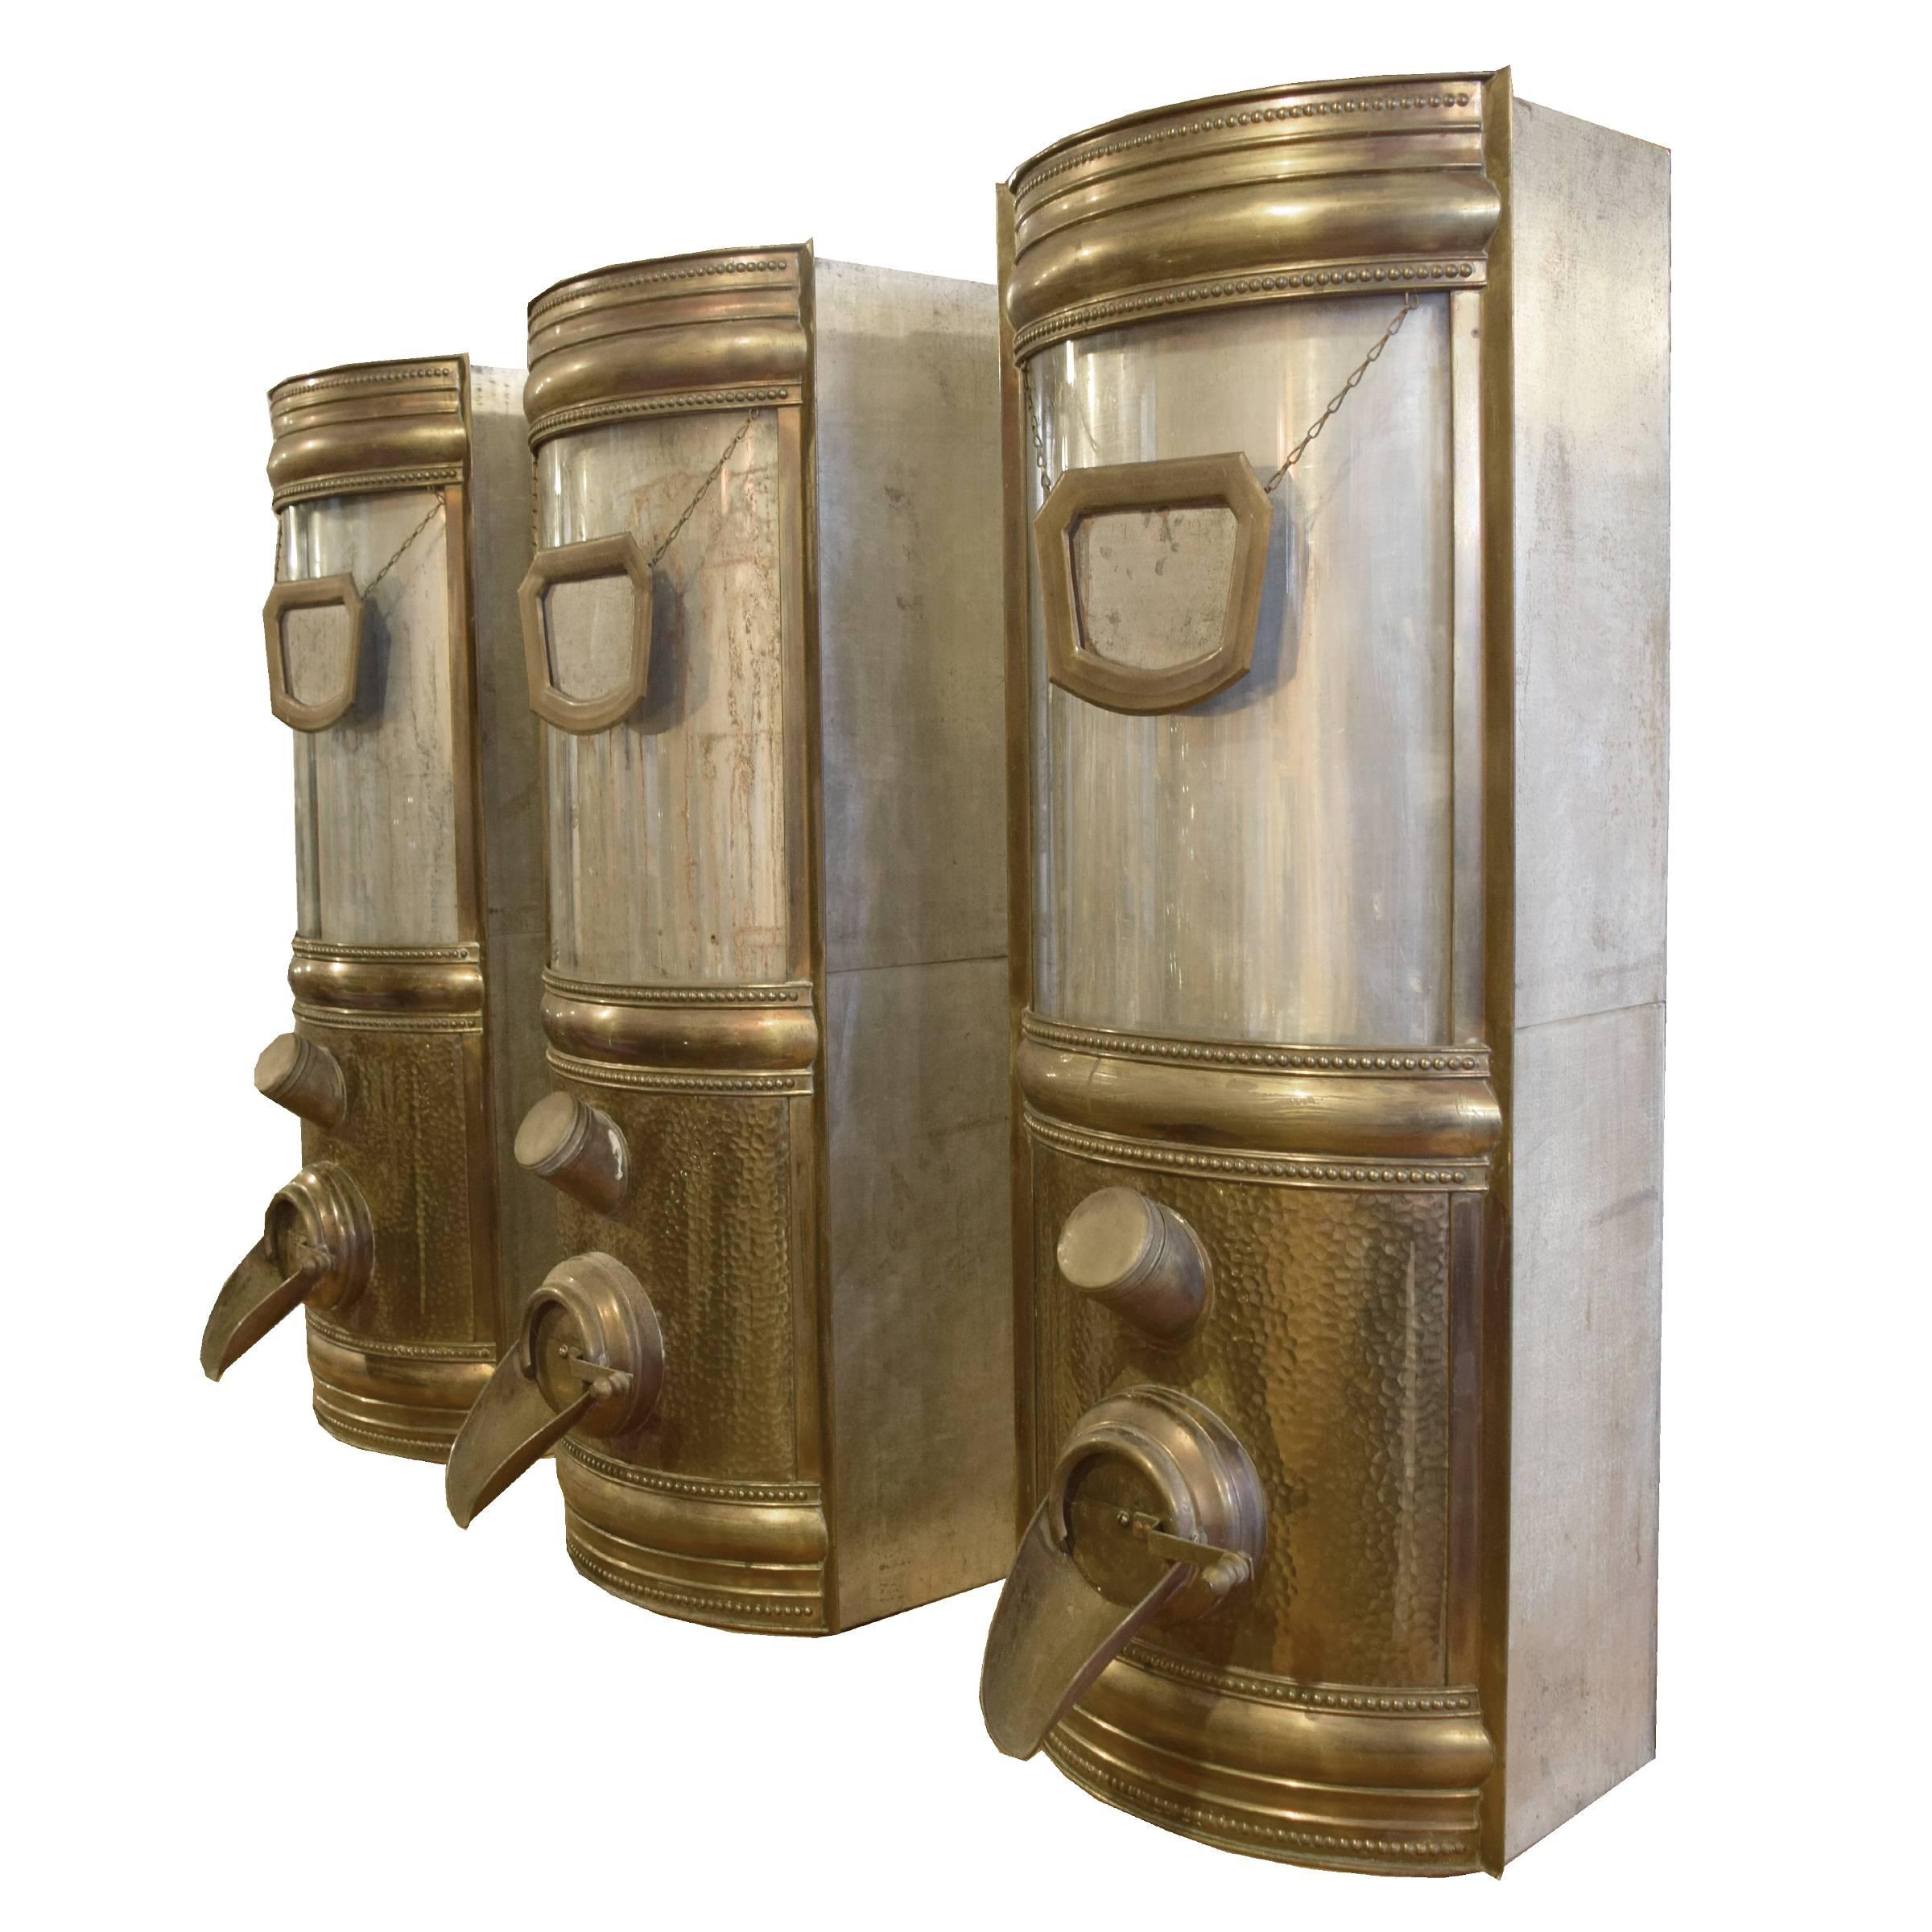 The best set of six brass and glass coffee beans dispensers with a bean display window, brass framed name tag holder, spout, and scoop, circa 1900.